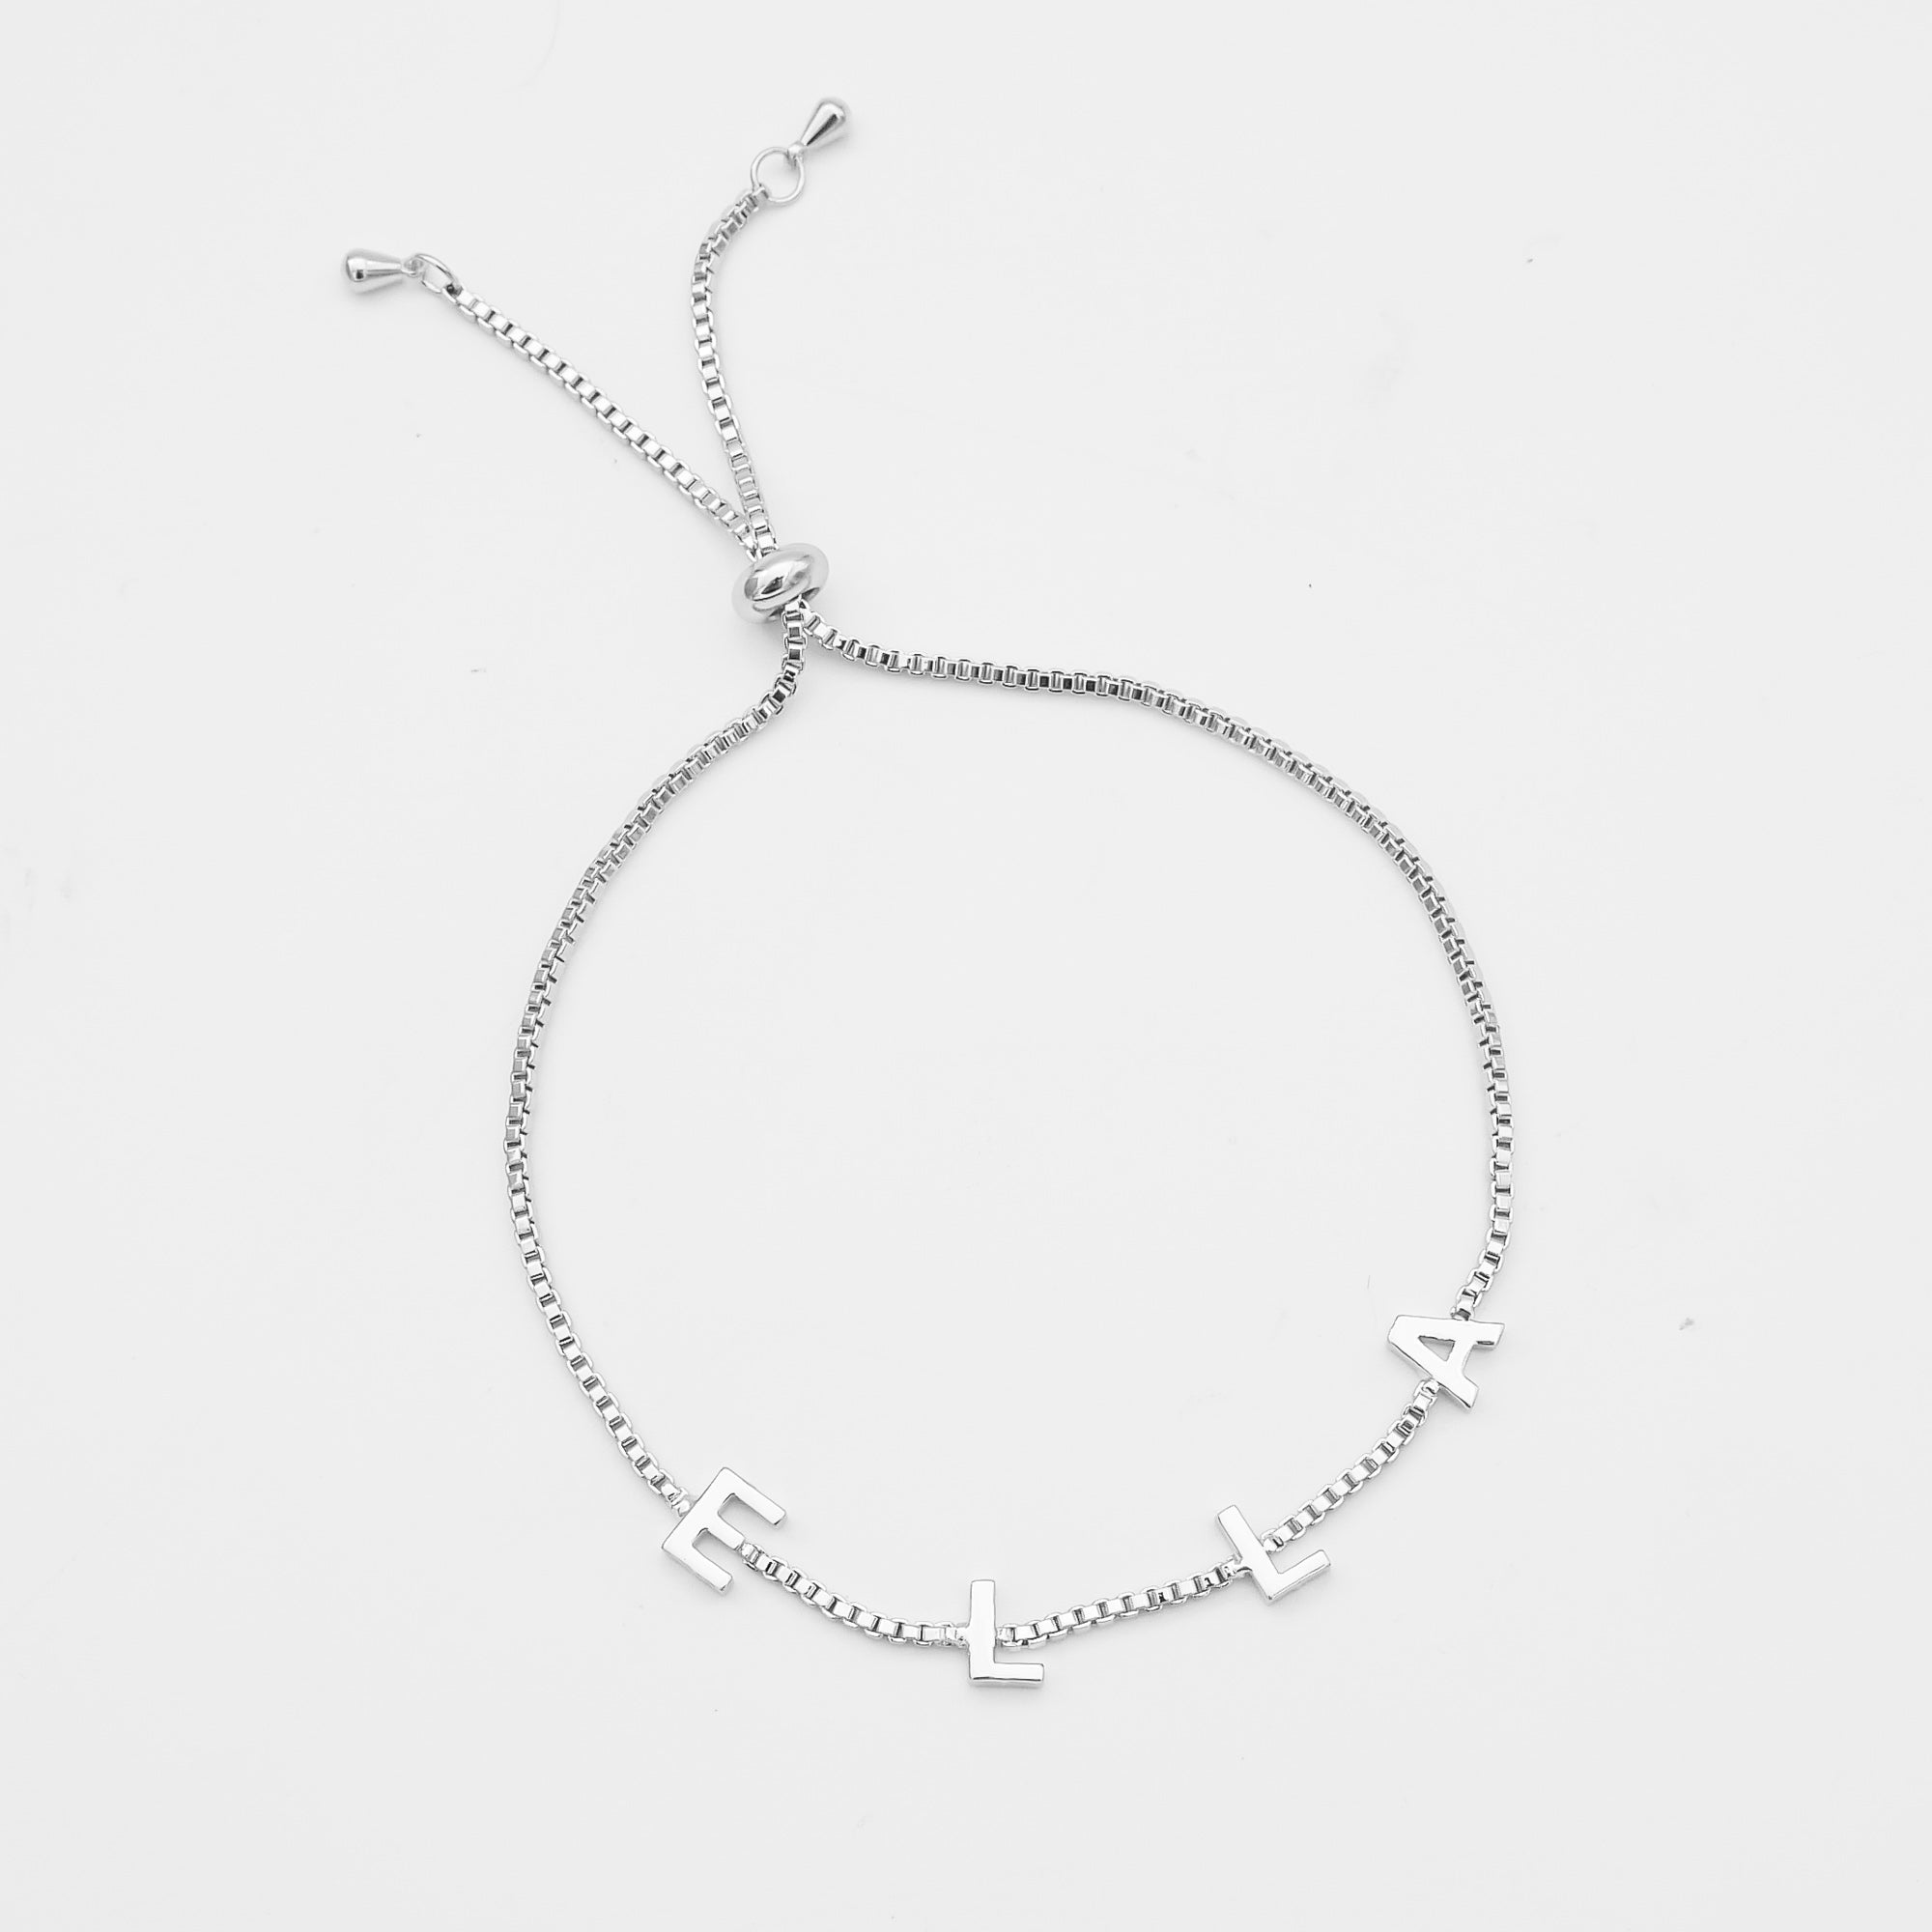 Classic personalised name bracelet in Silver with charm